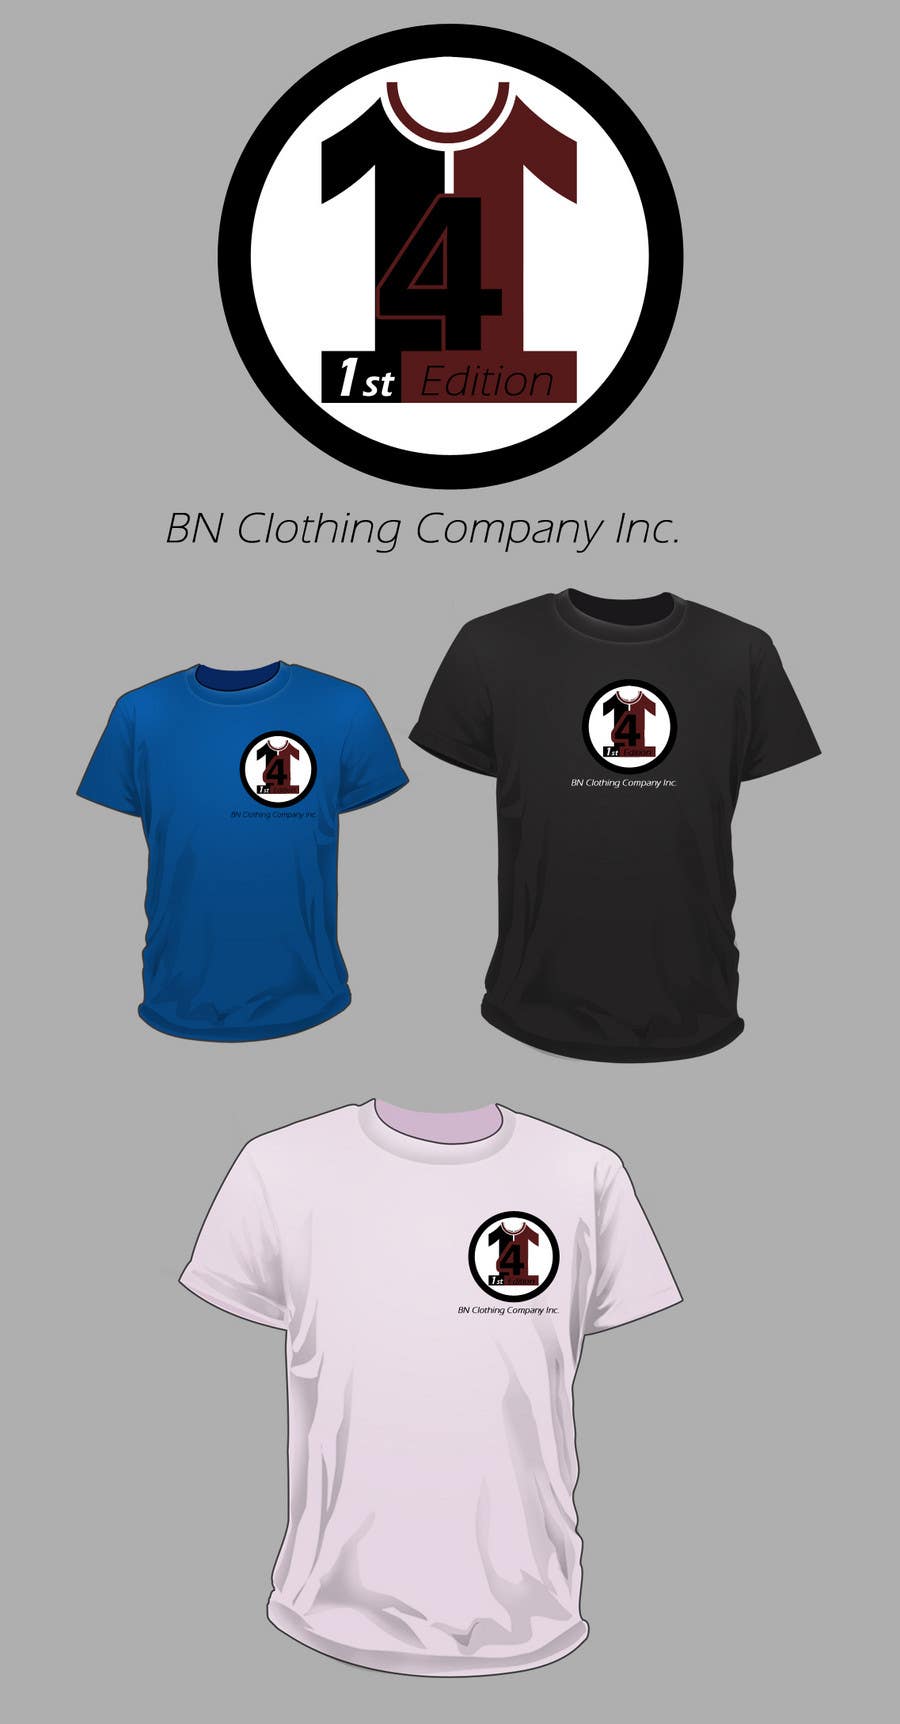 Konkurrenceindlæg #137 for                                                 T-shirt Design for The BN Clothing Company Inc.
                                            